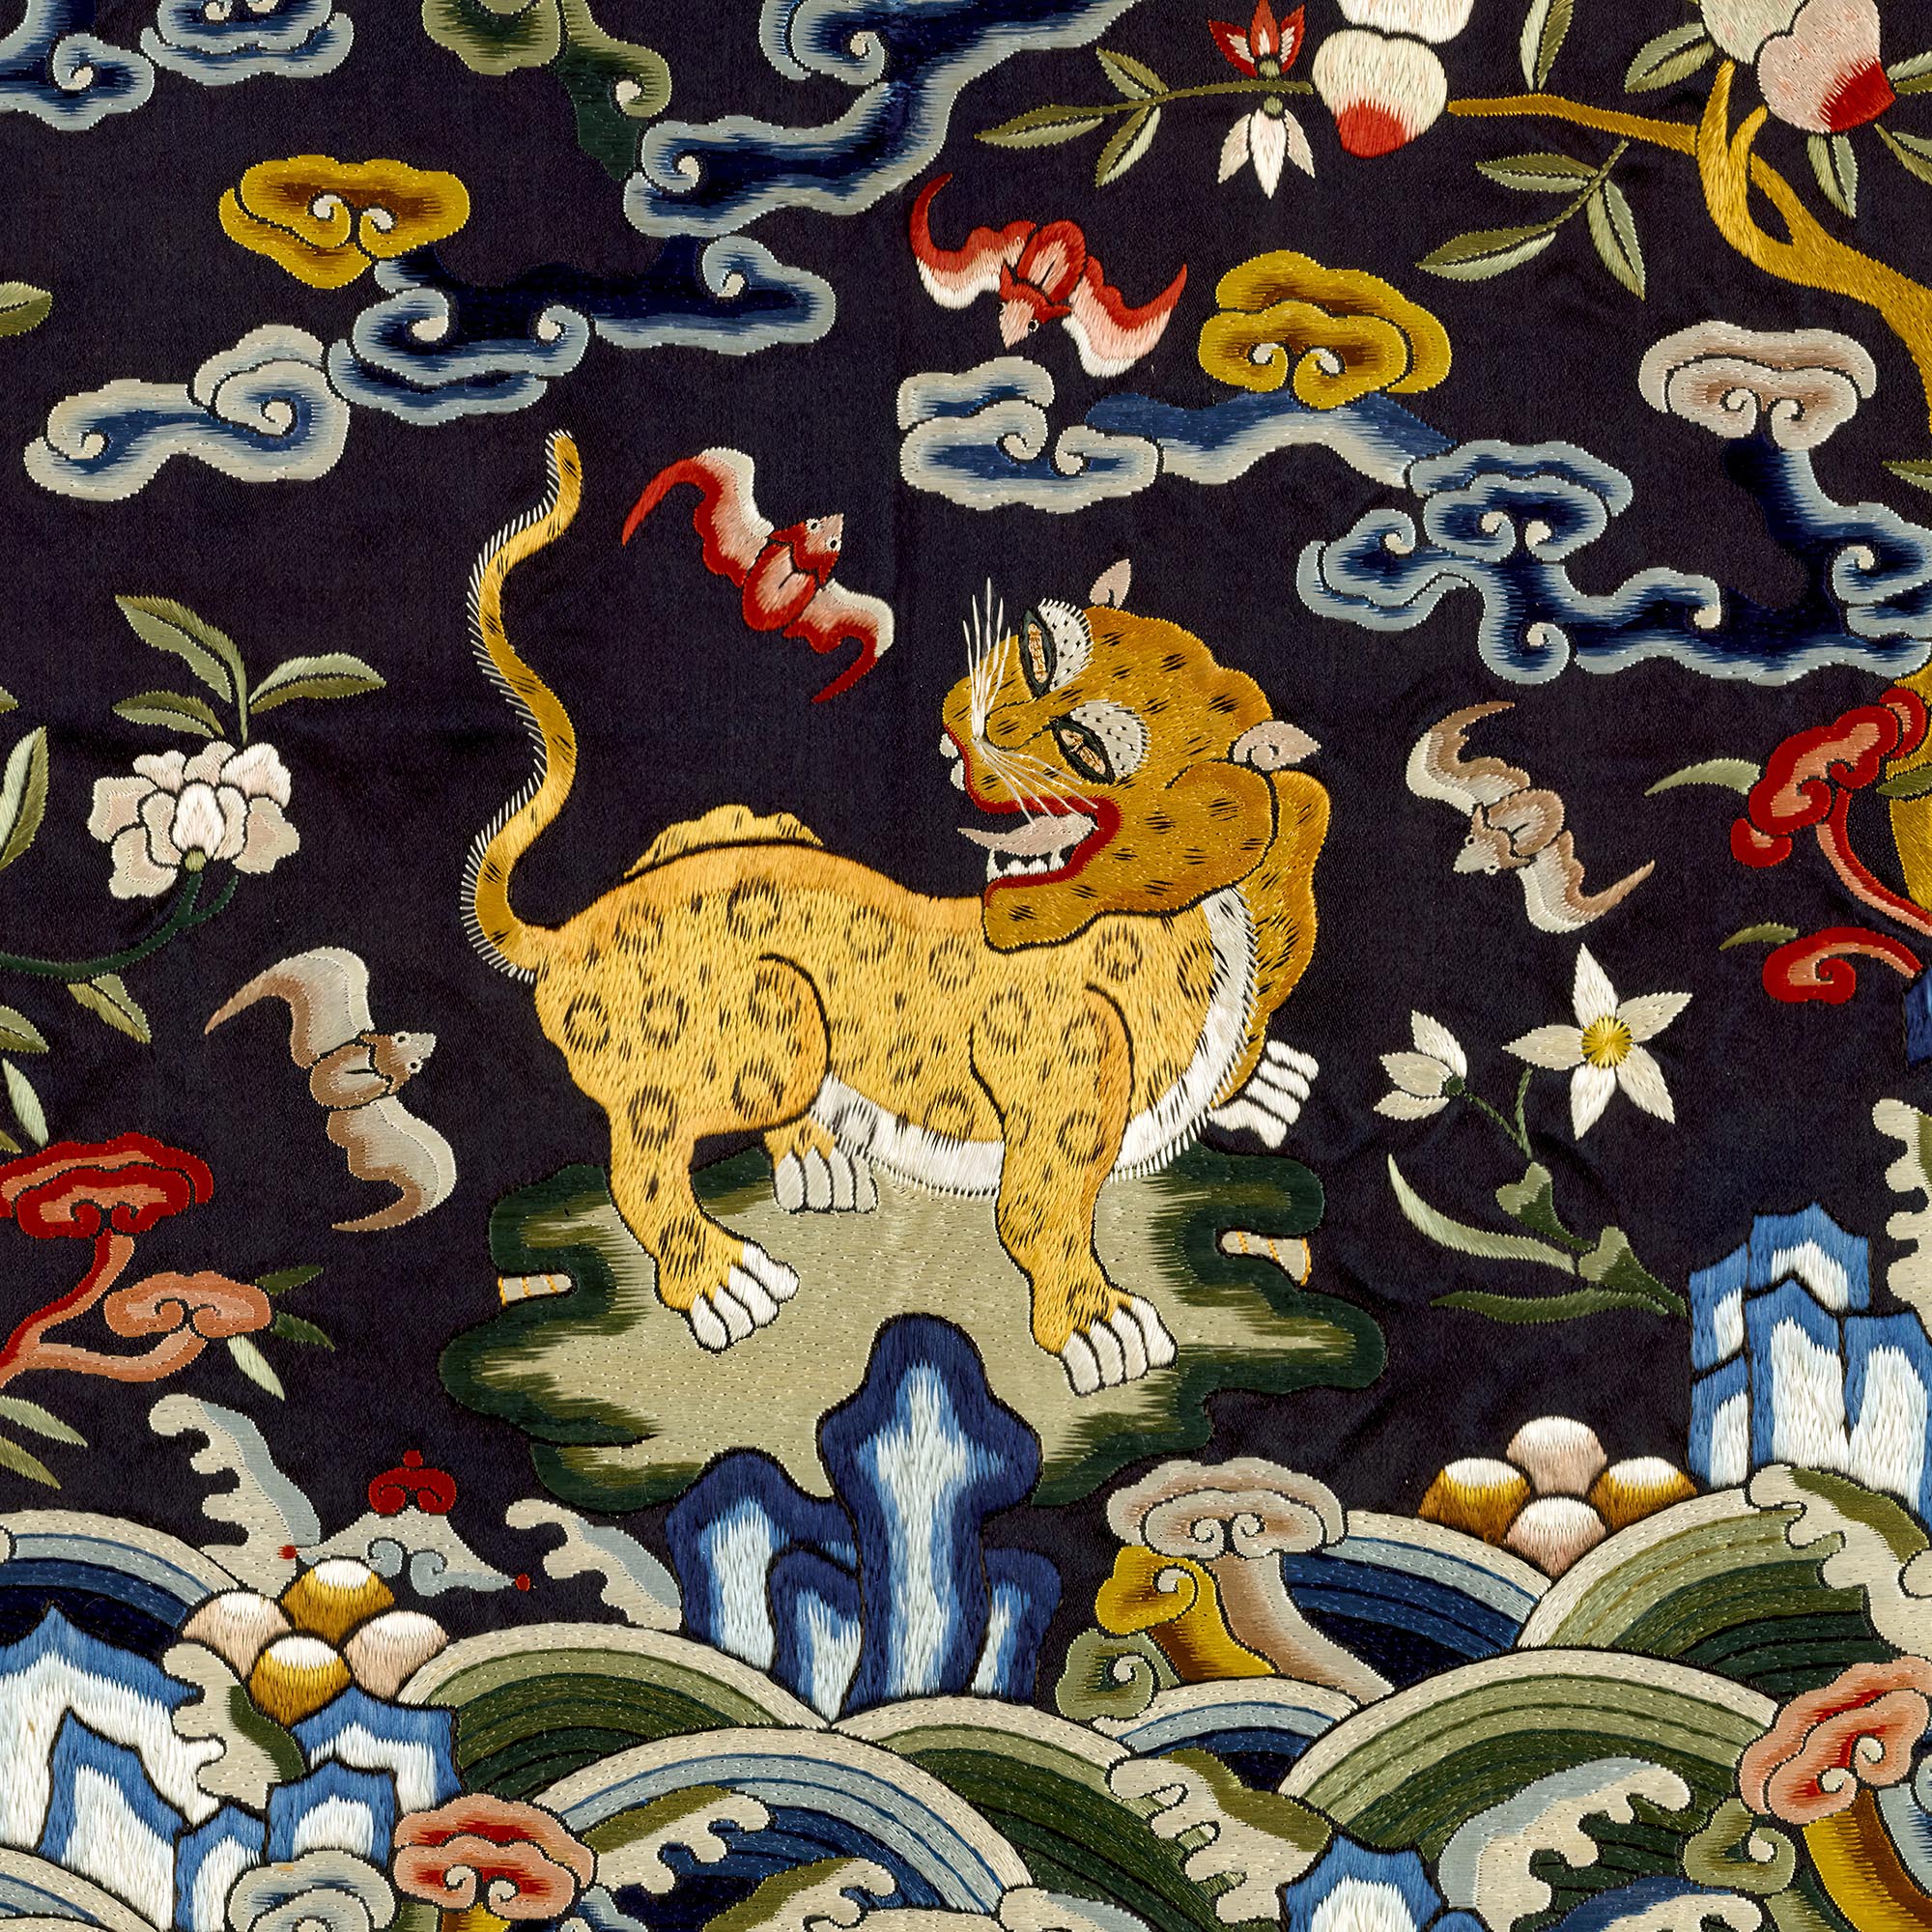 giclee Chinese Silk Embroidery Leopard Panther Tiger Mandarin Square Qing Dynasty, Antique Wall Art Decor Ornate Vintage Fine Art Print